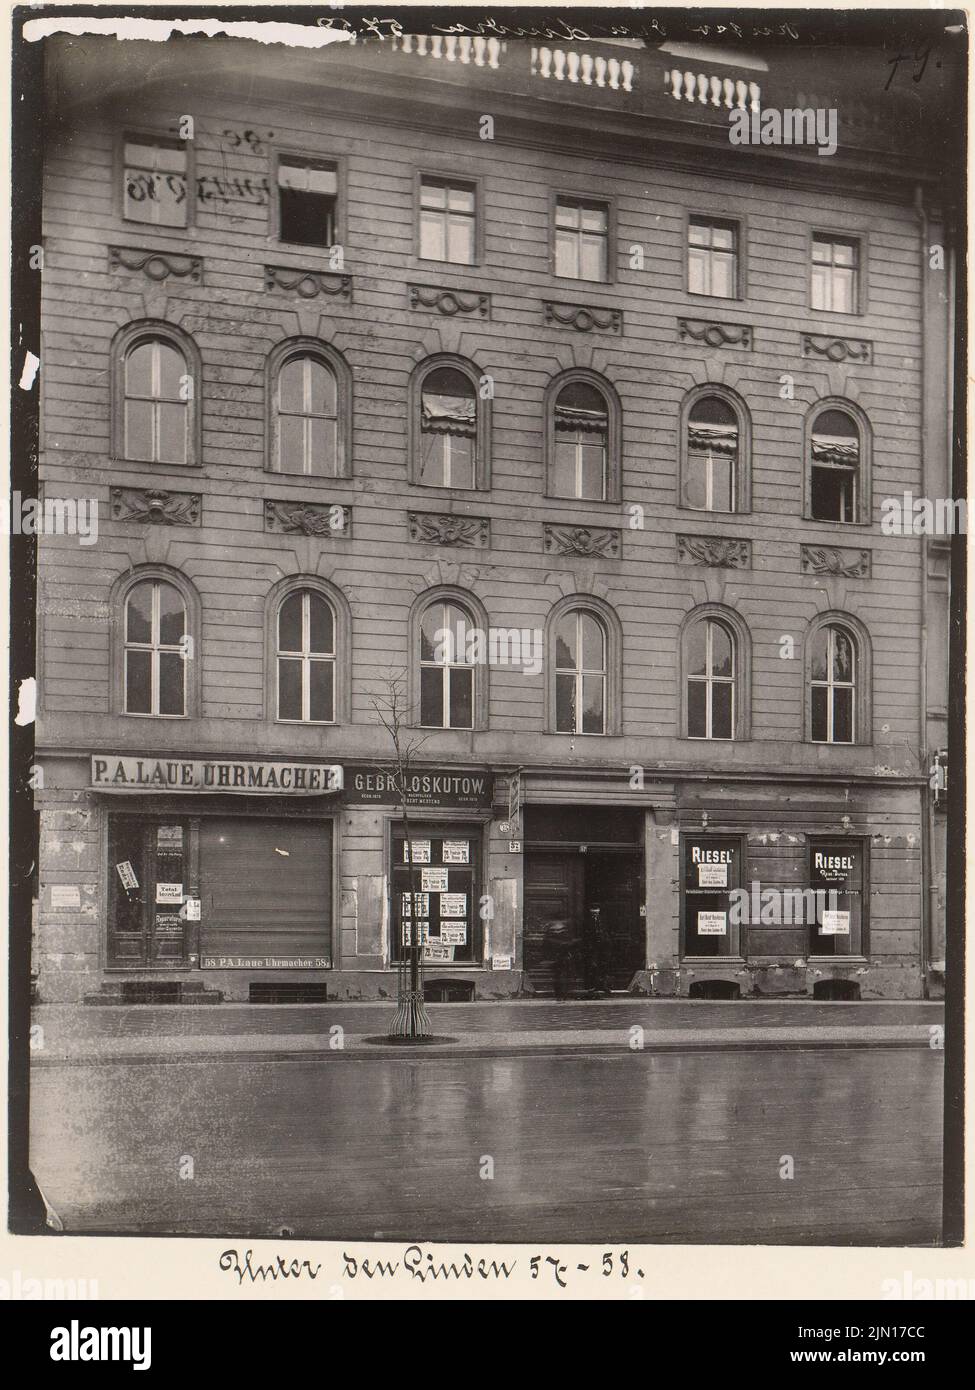 Unger (1743-1799), residential building Unter den Linden 57-58, Berlin-Mitte. (From: Julius Kohte, Alt-Berlin, buildings in Berlin and Charlottenburg, recorded in 1907-1914) (approx. 1770): View. Photo on paper, 24.3 x 18.2 cm (including scan edges) Unger  (1743-1799): Wohnhaus Unter den Linden 57-58, Berlin-Mitte. (Aus: Julius Kohte, Alt-Berlin, Bauwerke in Berlin und Charlottenburg, aufgenommen 1907-1914) Stock Photo